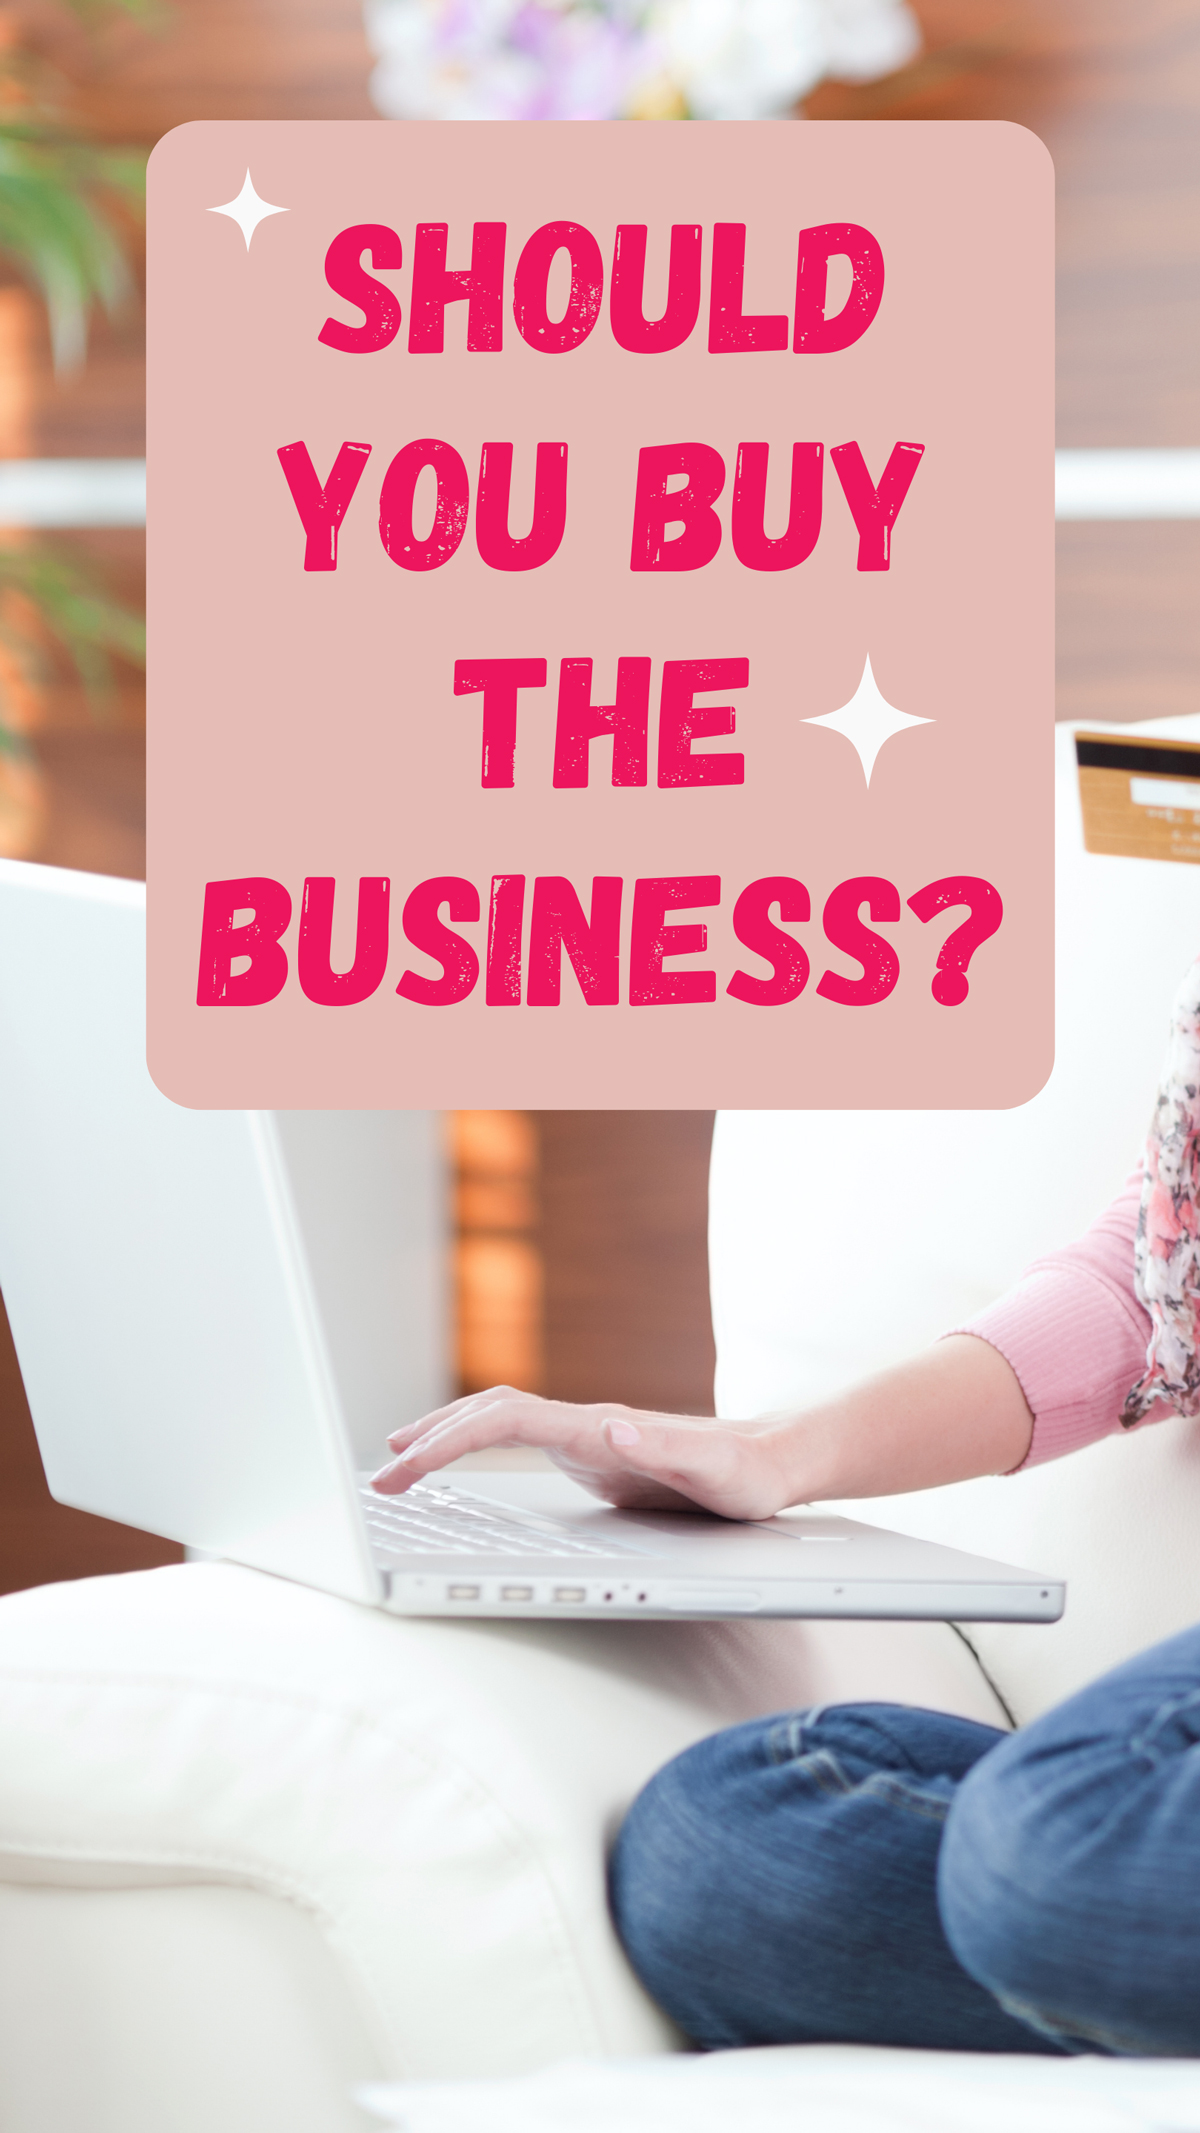 Questions to ask before buying a business